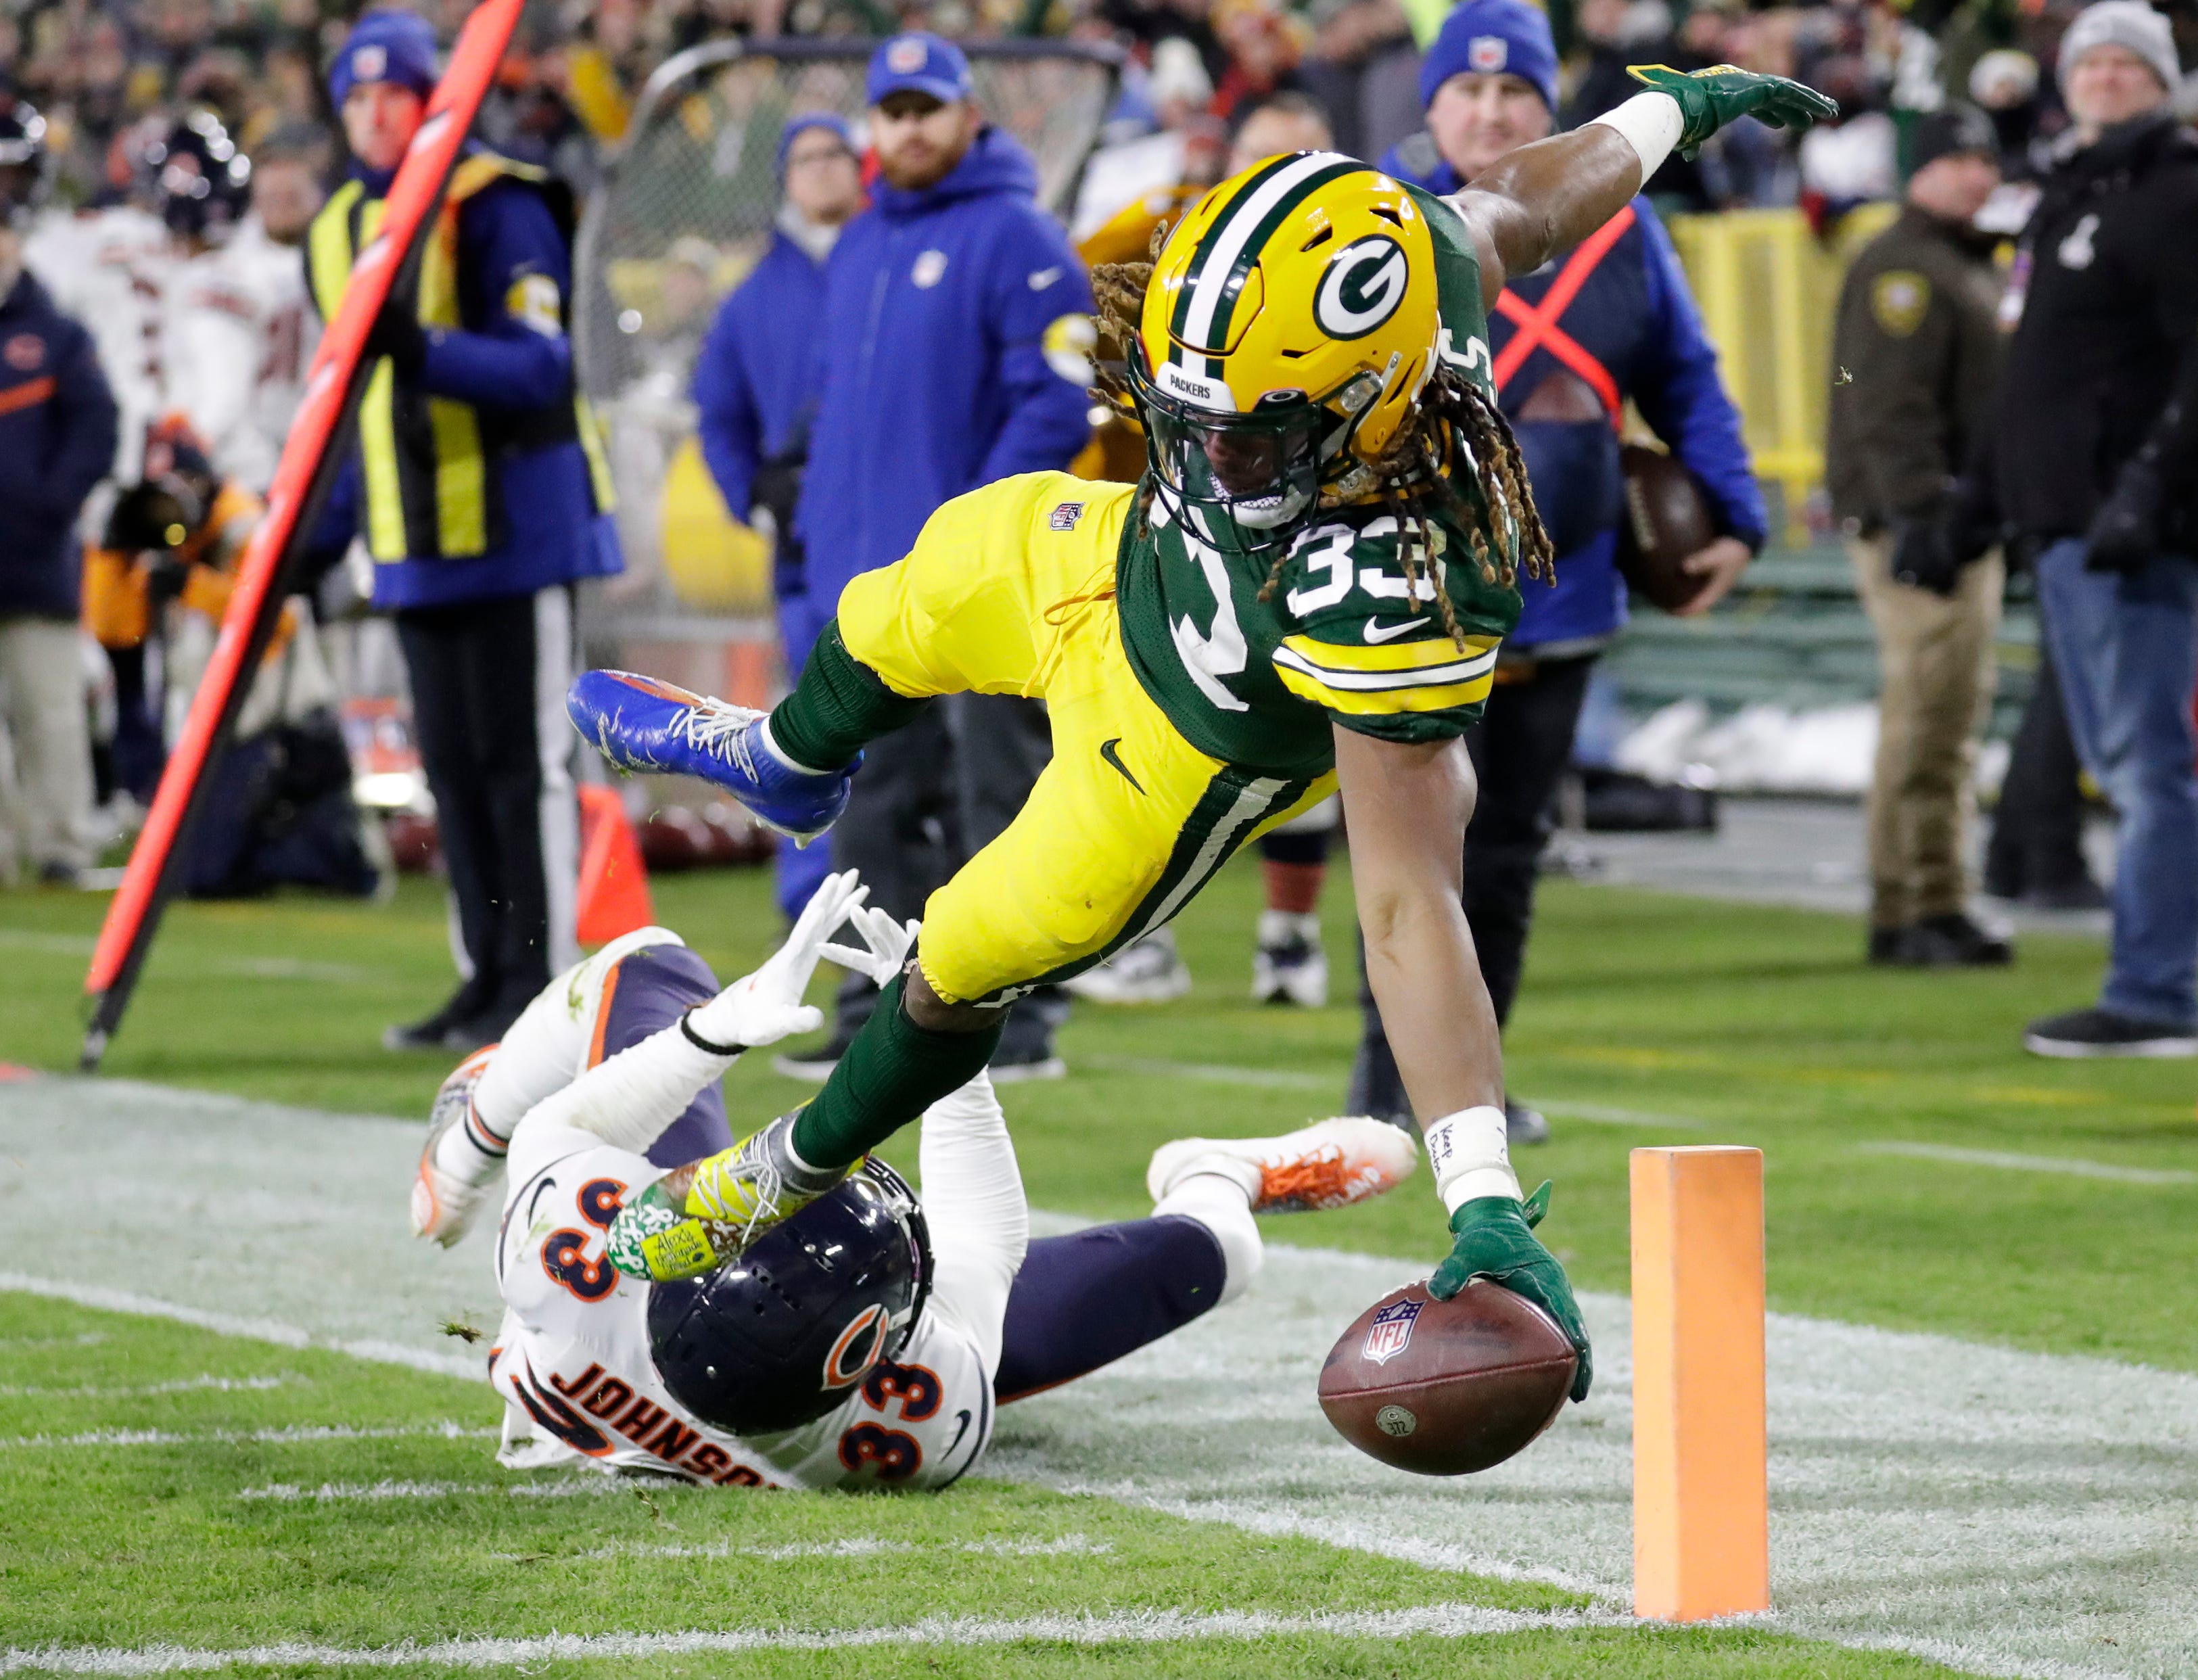 Green Bay Packers running back Aaron Jones (33) dives for a touchdown against Chicago Bears cornerback Jaylon Johnson (33) in the third quarter during their football game Sunday, December 12, 2021, at Lambeau Field in Green Bay, Wis. 
Dan Powers/USA TODAY NETWORK-Wisconsin